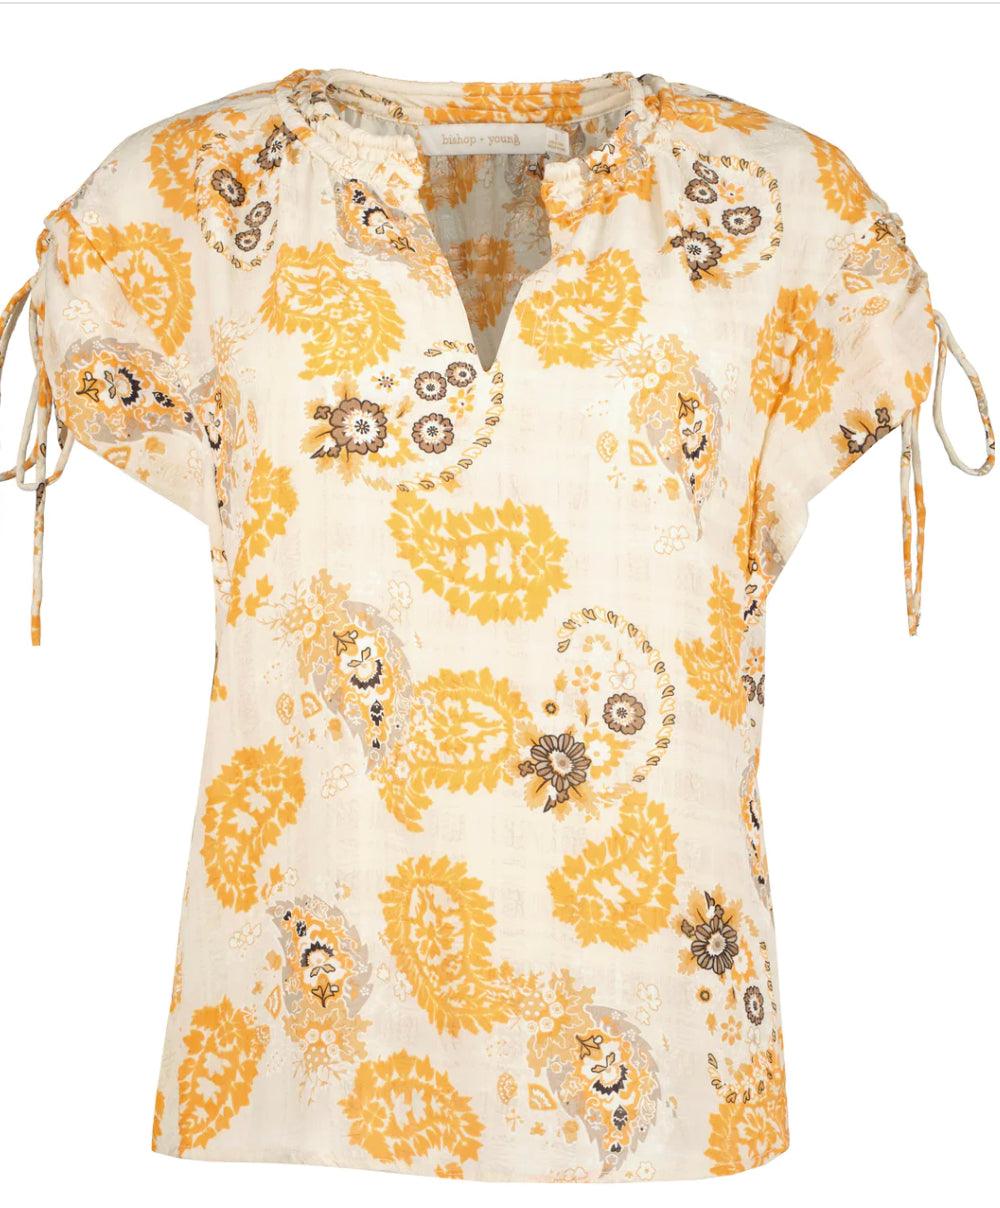 Luna Blouse - Tru Blue  Montecito print top is a band collar, v-neckline with tie at the sleeves. The pop of yellow and neutral paisley